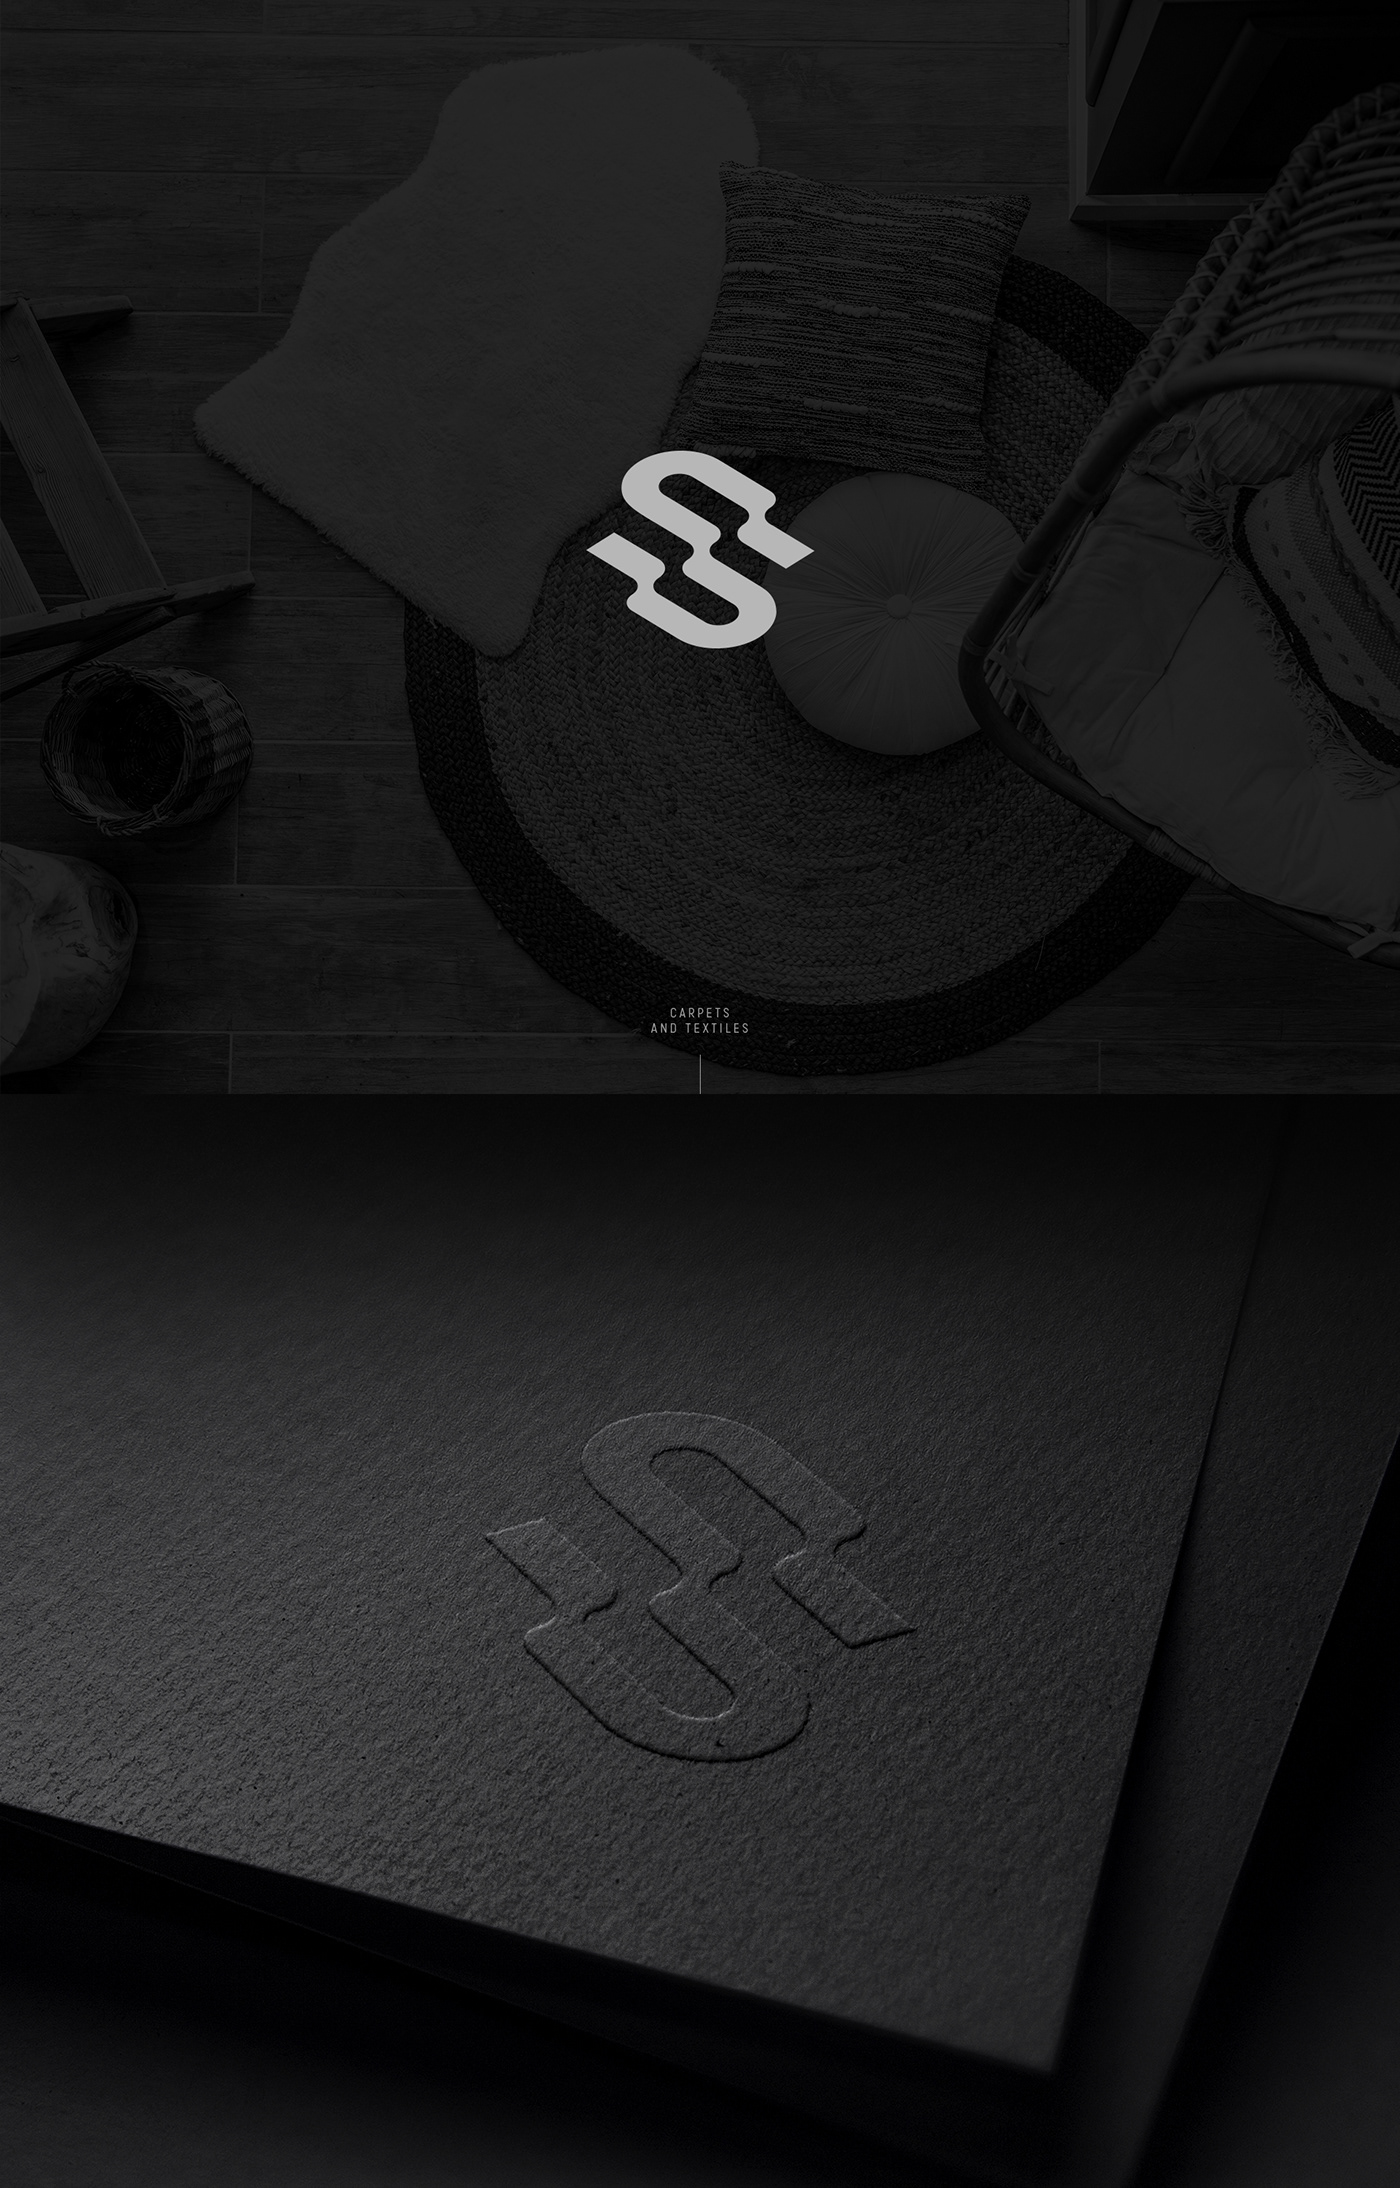 A new collection of logos, marks from me.

Read more at: https://www.behance.net/gallery/121035571/L